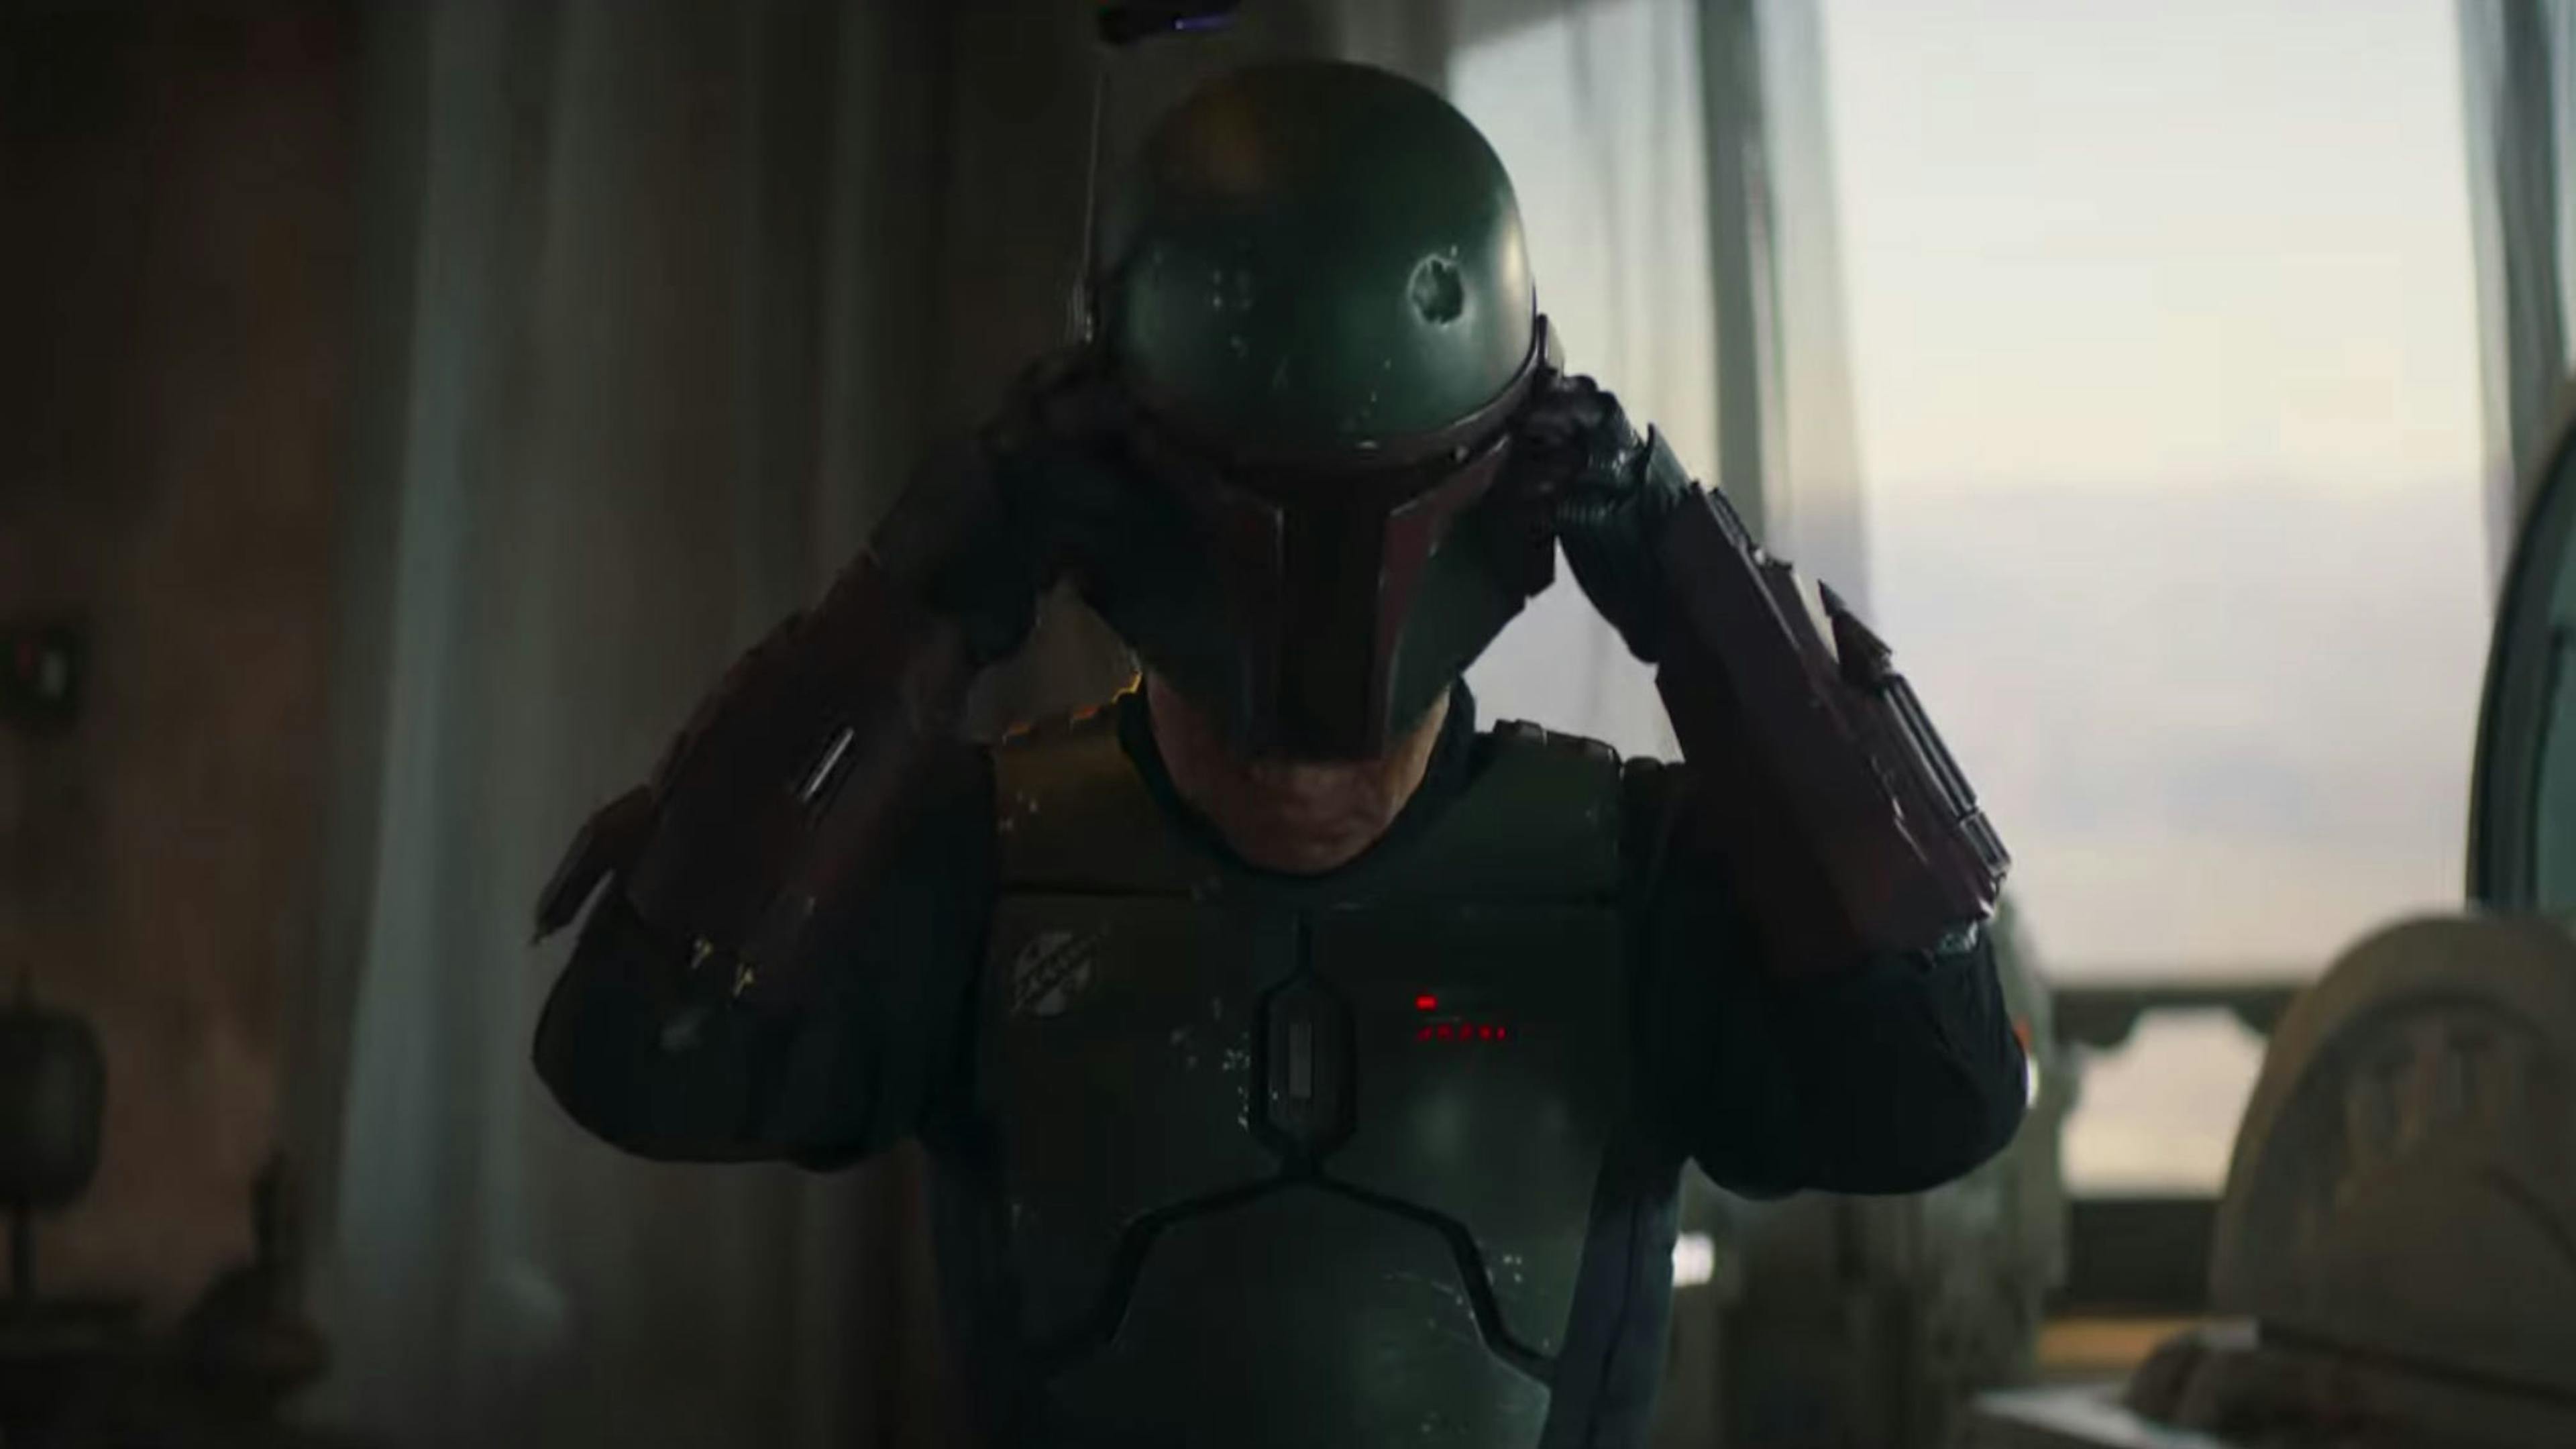 The new Book Of Boba Fett trailer is here: "Every galaxy has an underworld"